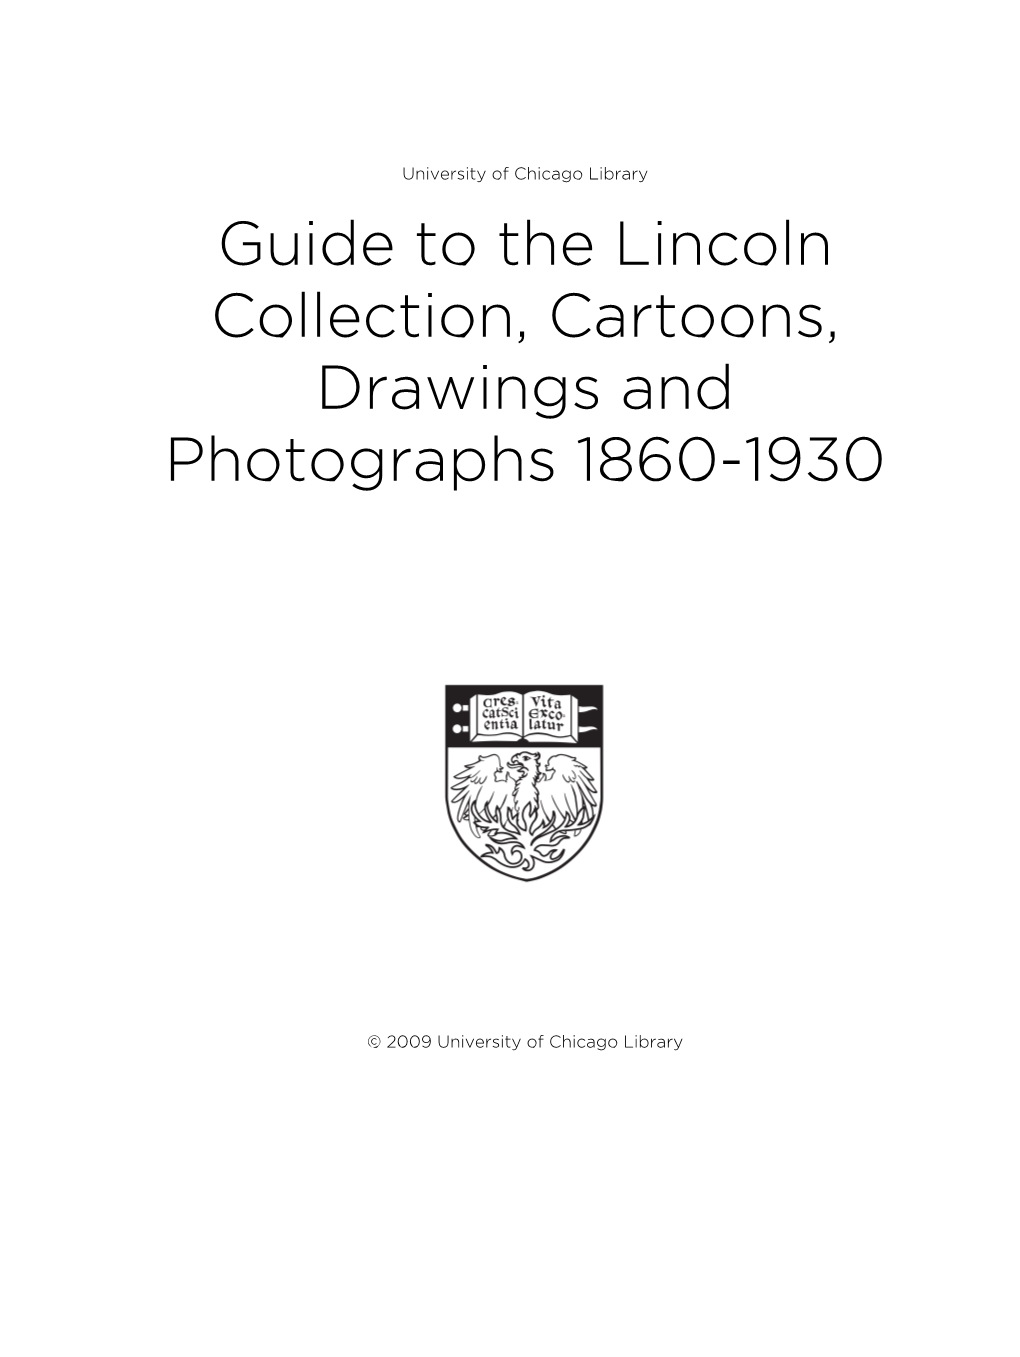 Guide to the Lincoln Collection, Cartoons, Drawings and Photographs 1860-1930